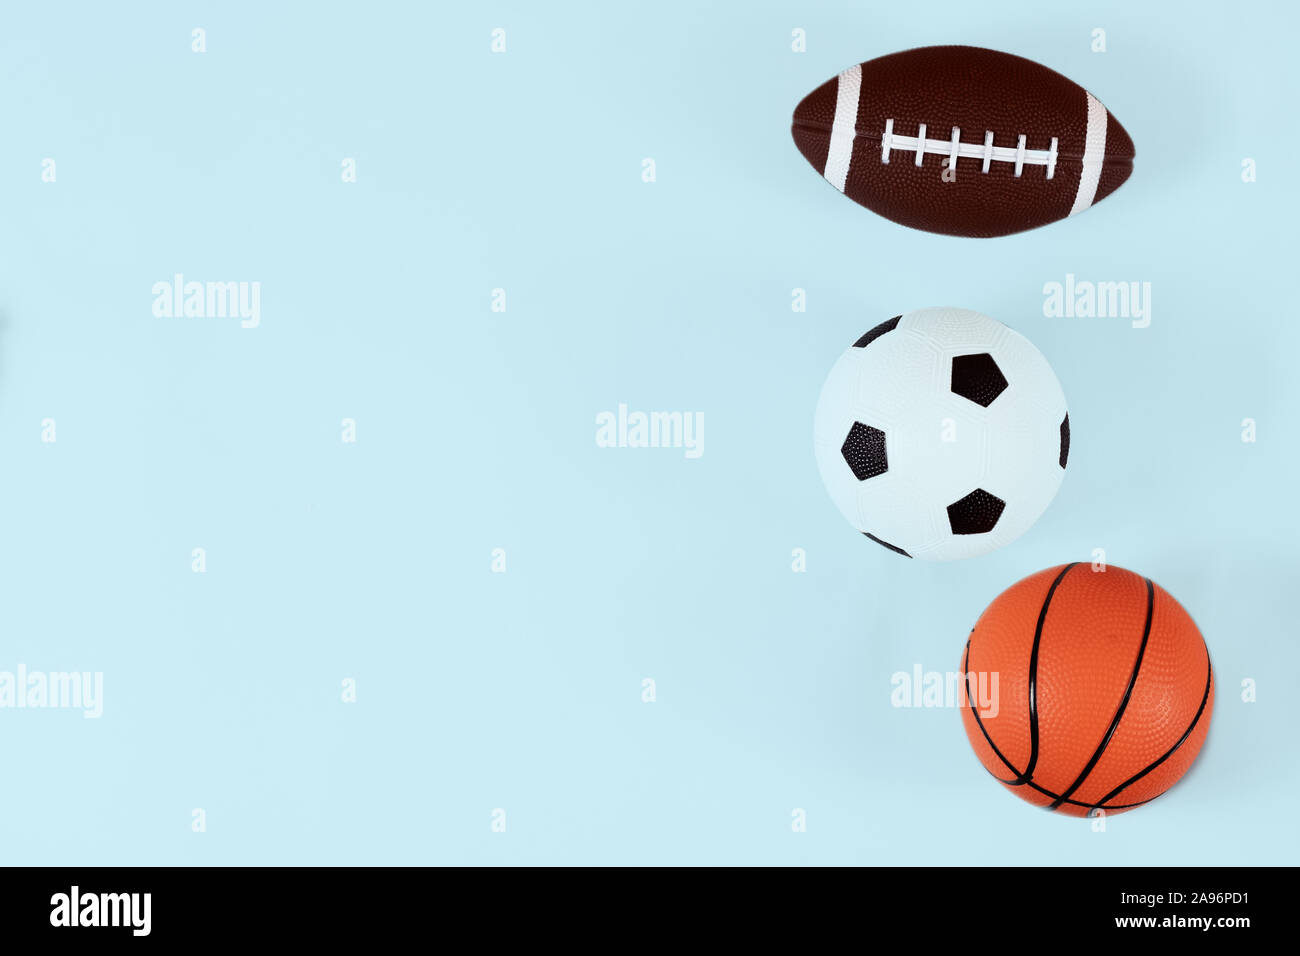 sport, fitness, game, sports equipment and objects concept Stock Photo